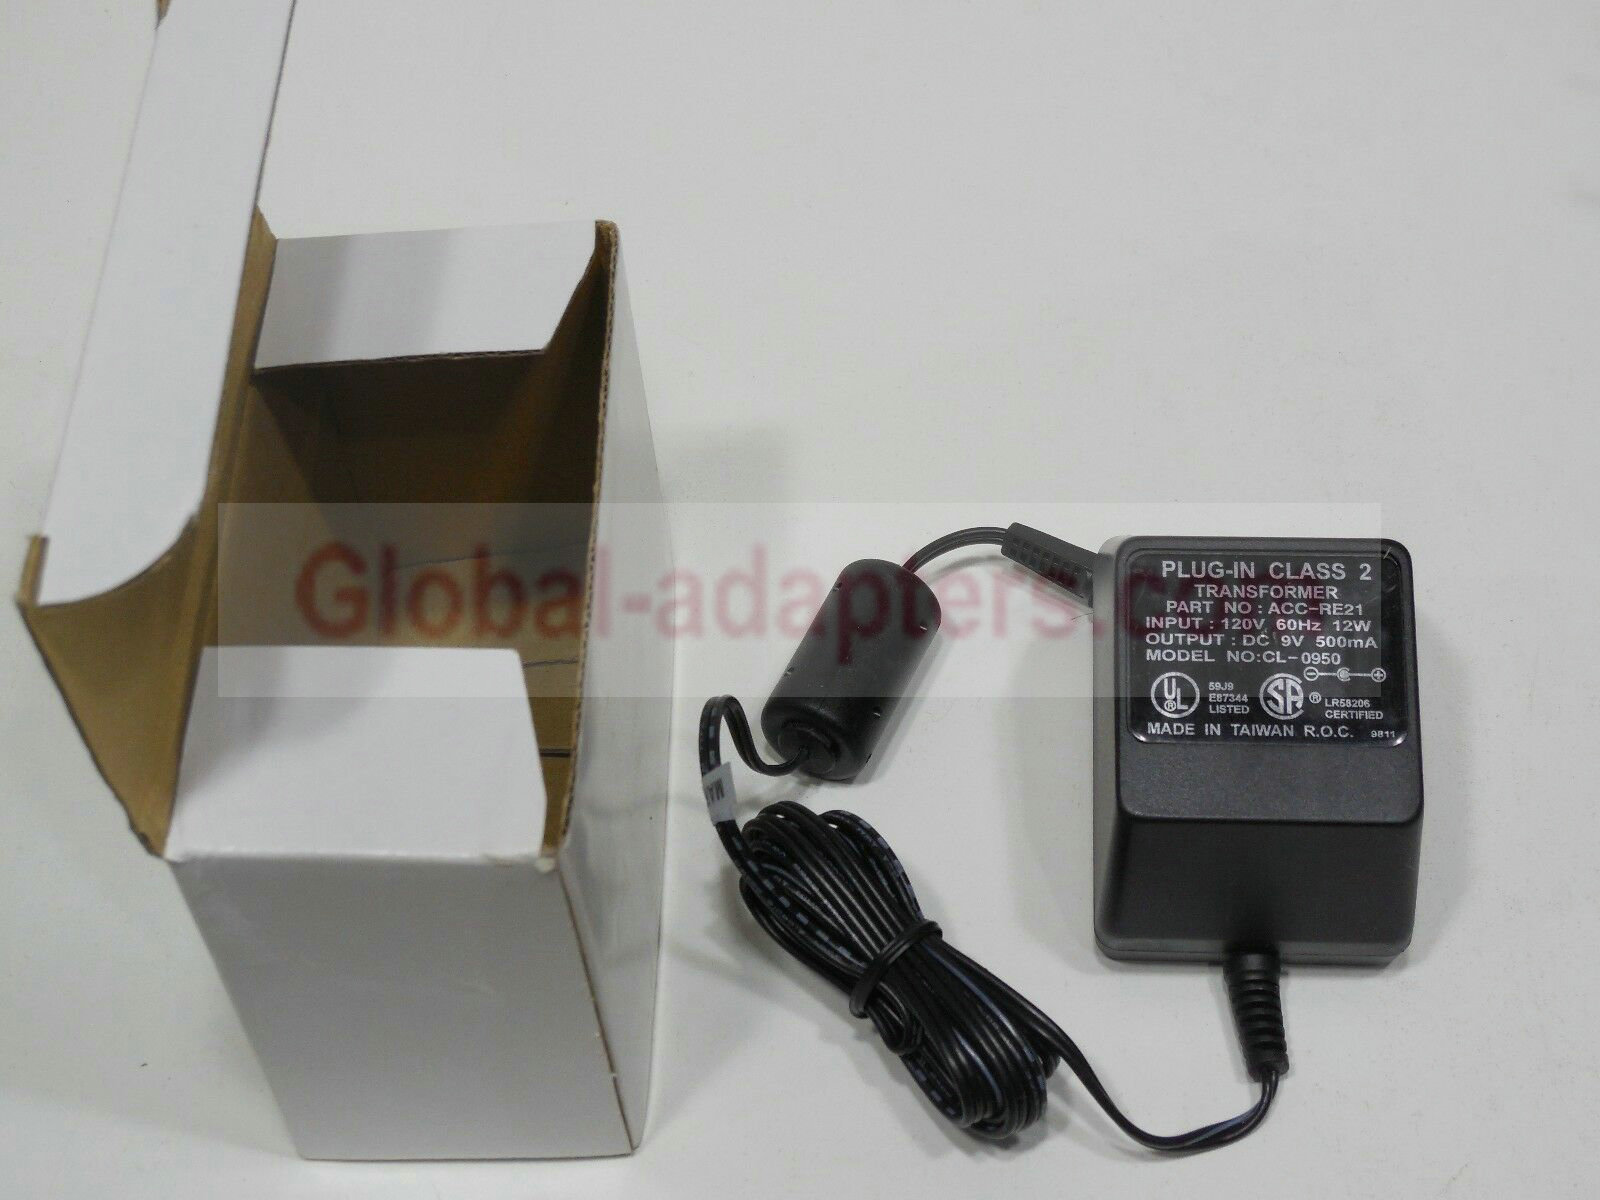 New 9V 500mA CL-0950 ACC-RE21 Class 2 Transformer Power Supply Ac Adapter - Click Image to Close